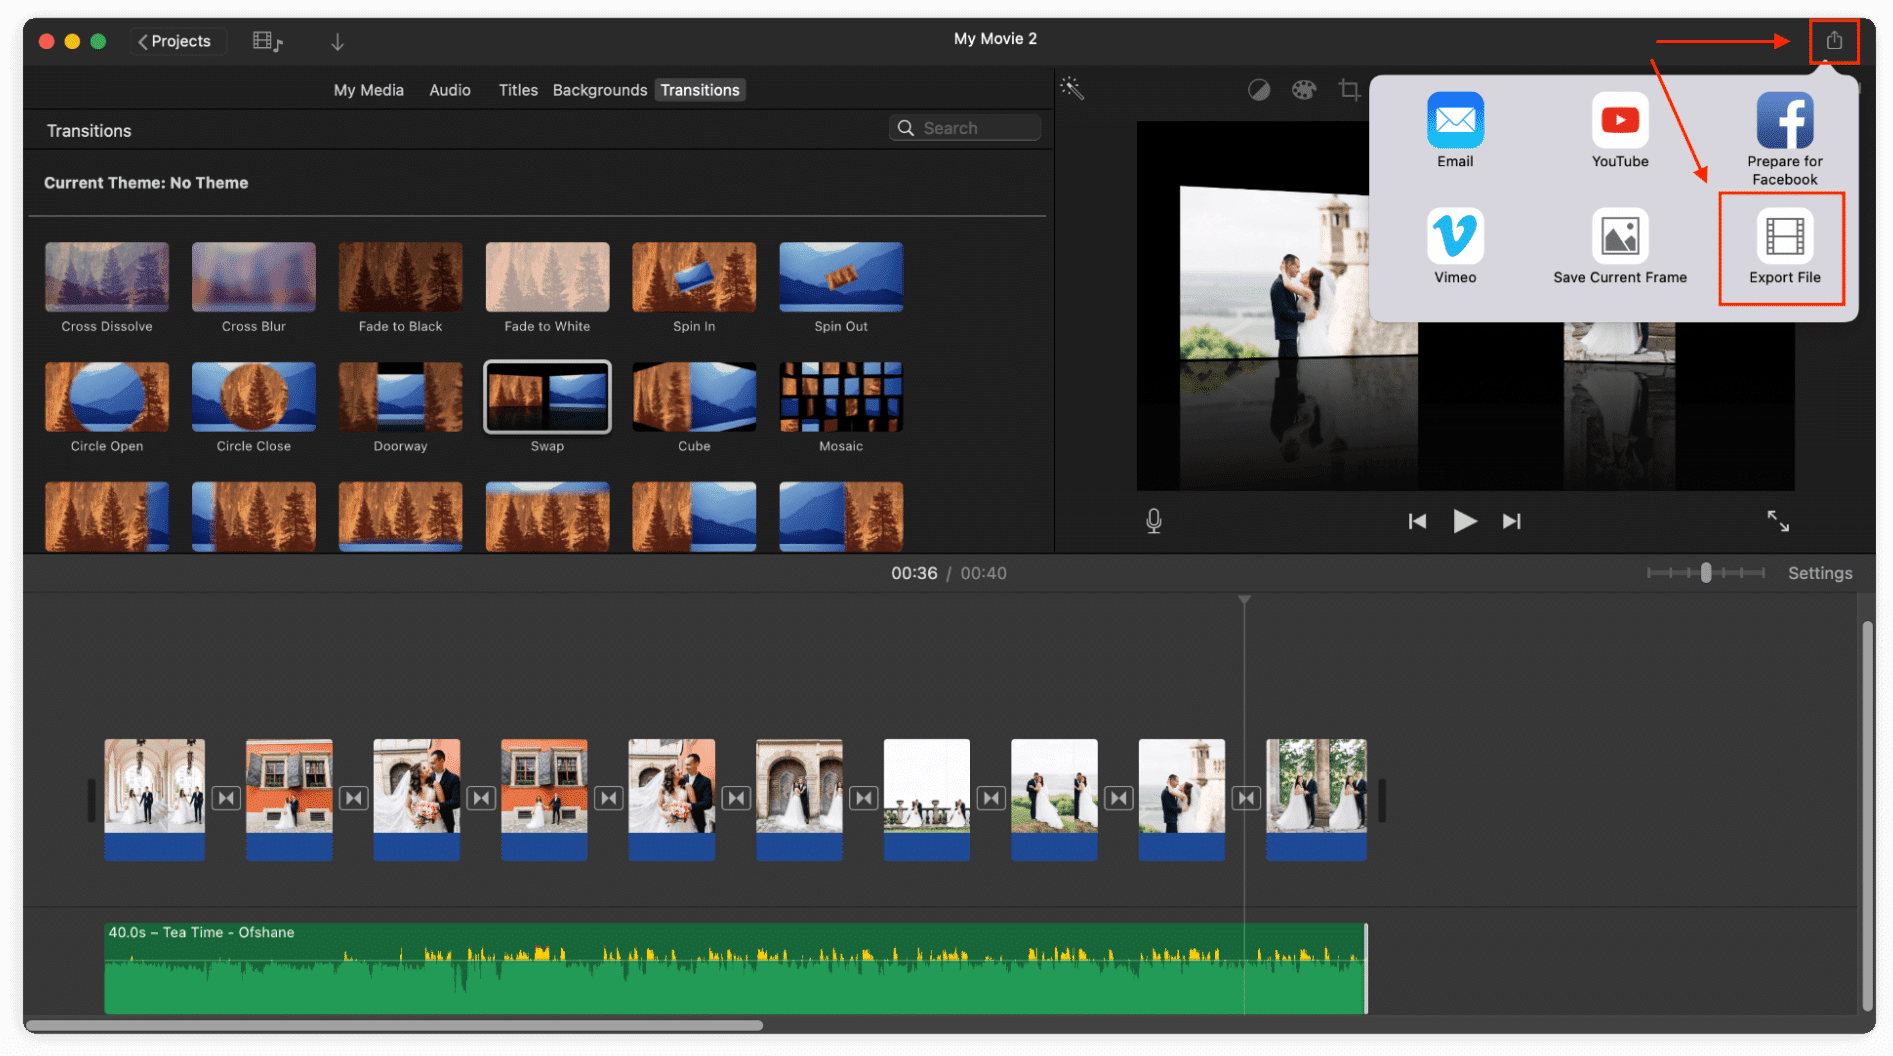 Steps to export files shown in iMovie app